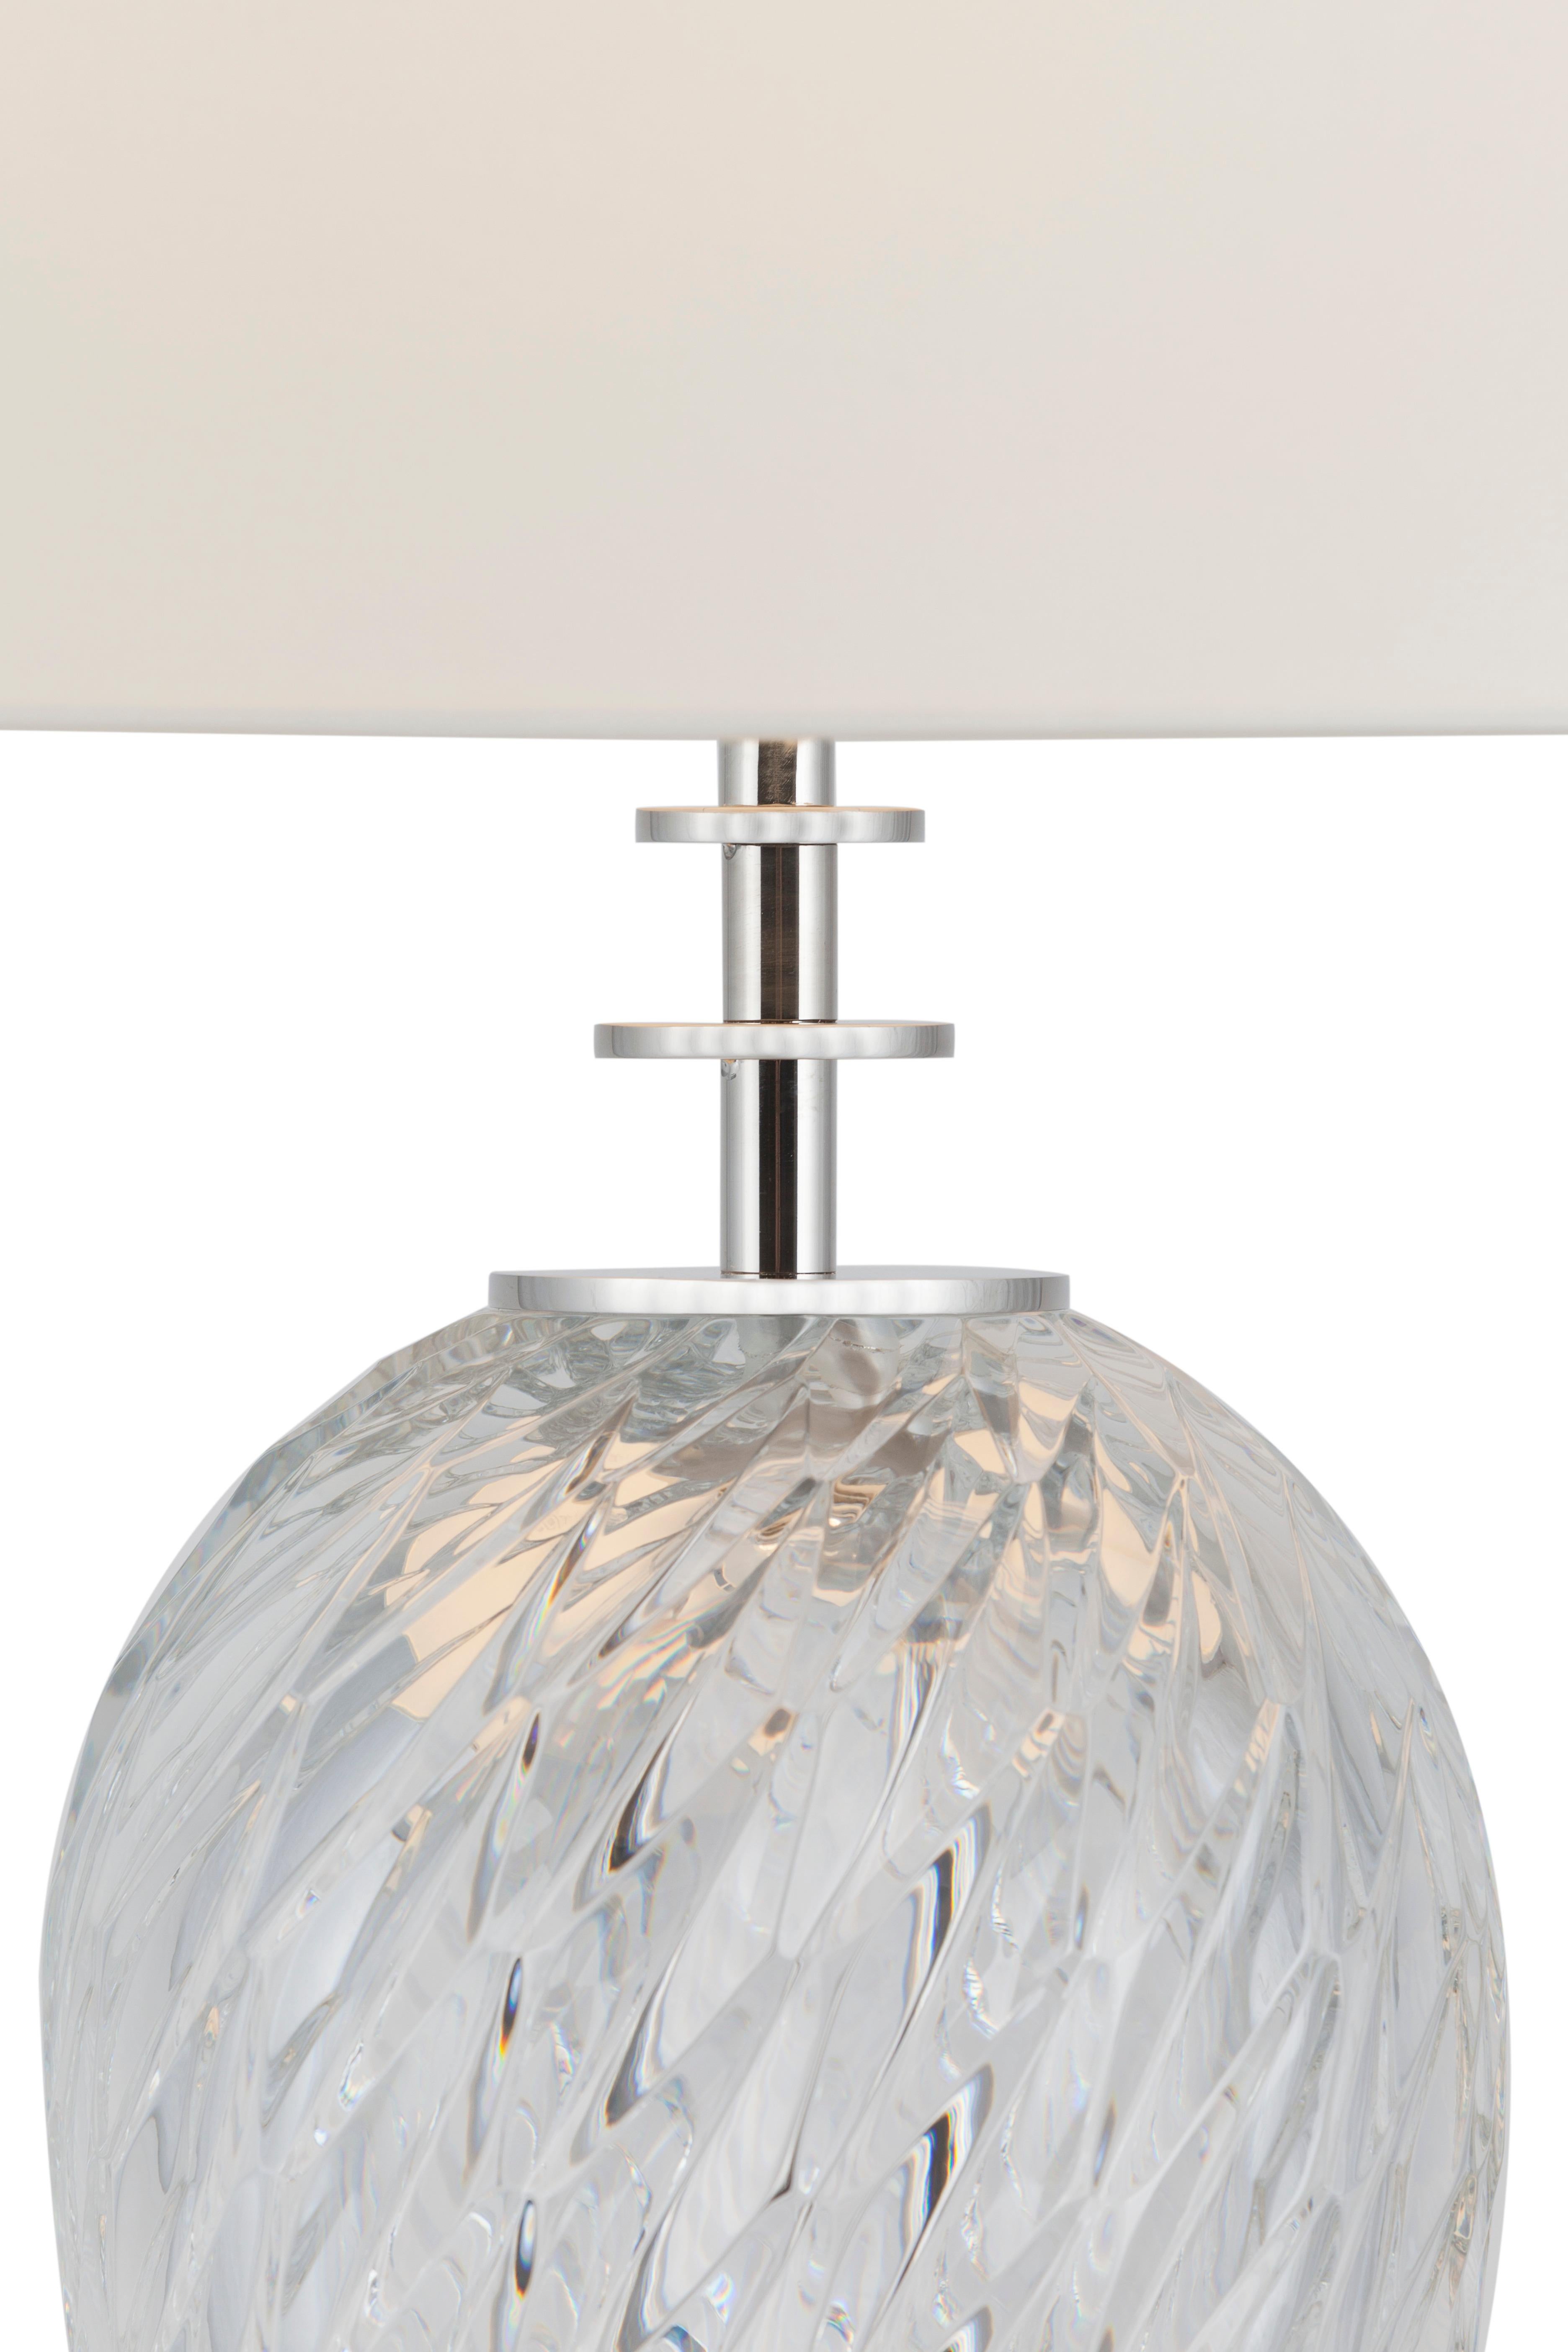 Brass Art Deco Vista Alegre Crystal Table Lamp Handmade in Portugal by Greenapple For Sale